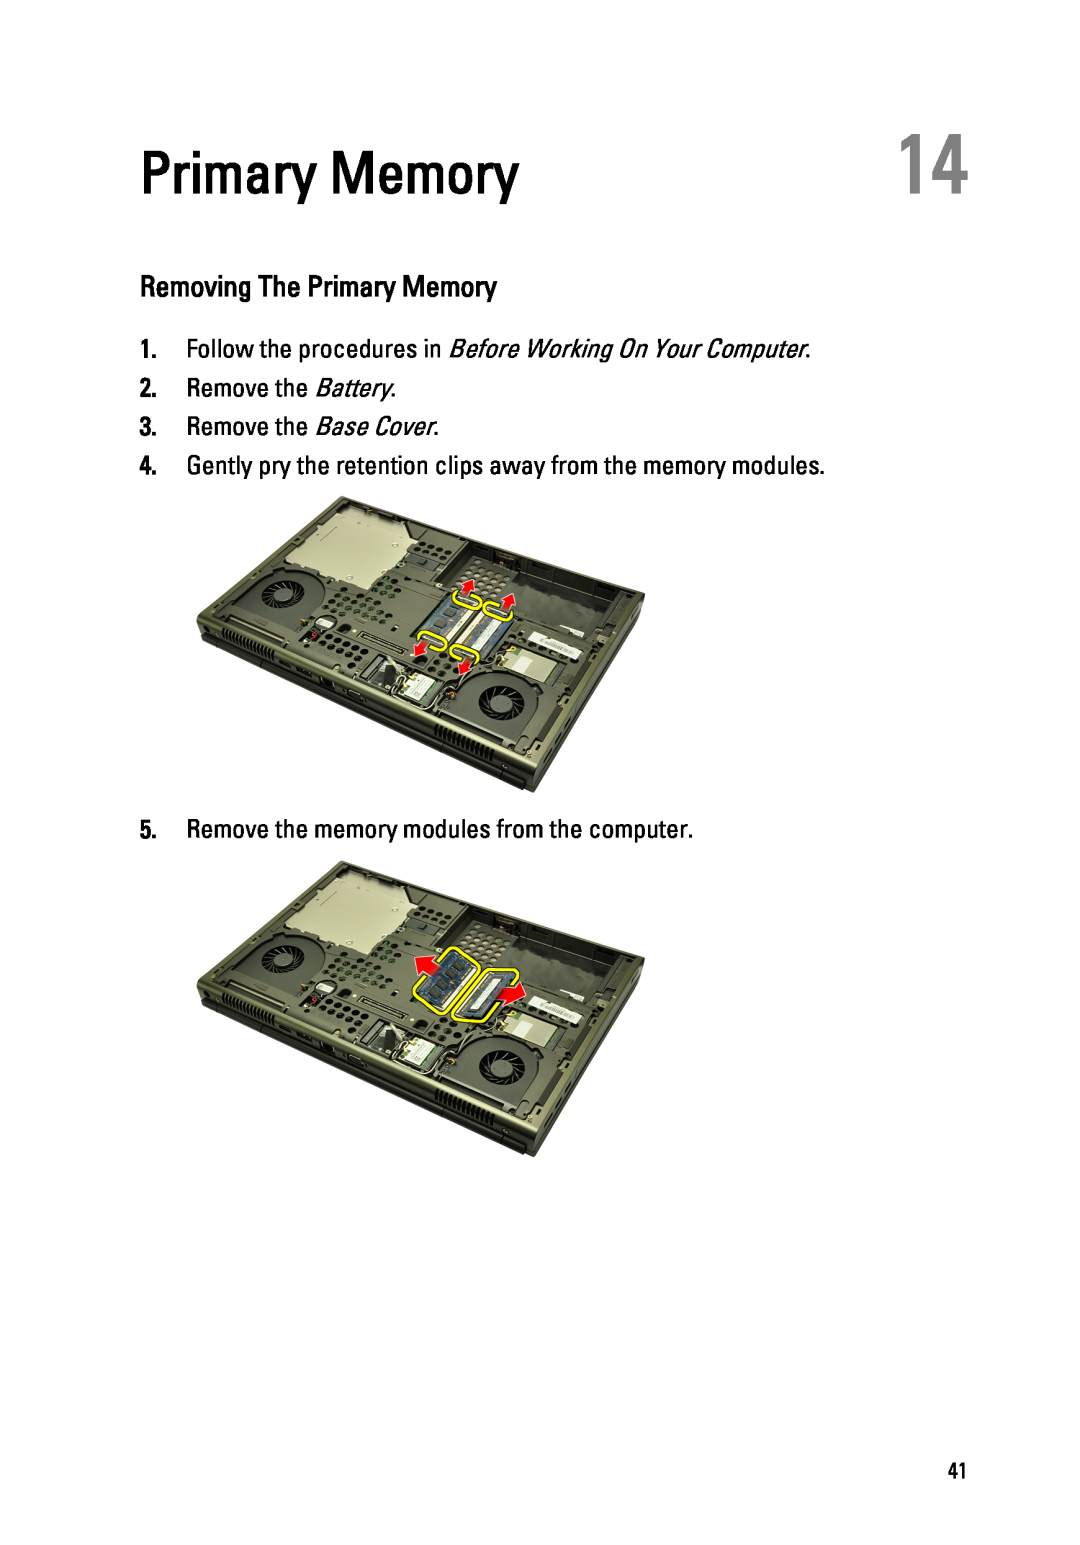 Dell M4600 owner manual Removing The Primary Memory, Gently pry the retention clips away from the memory modules 